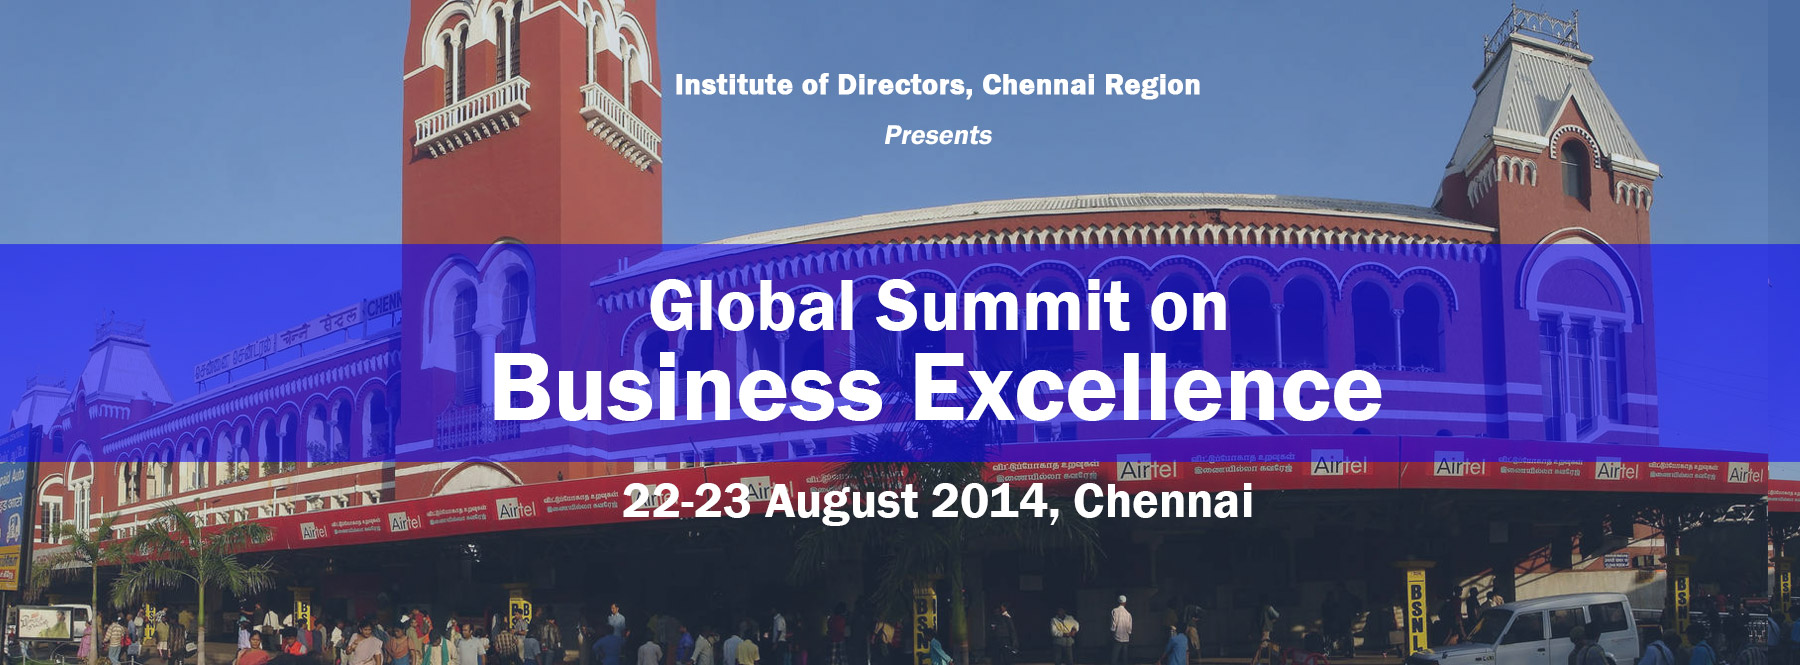 Global Summit on Business Excellence 2014